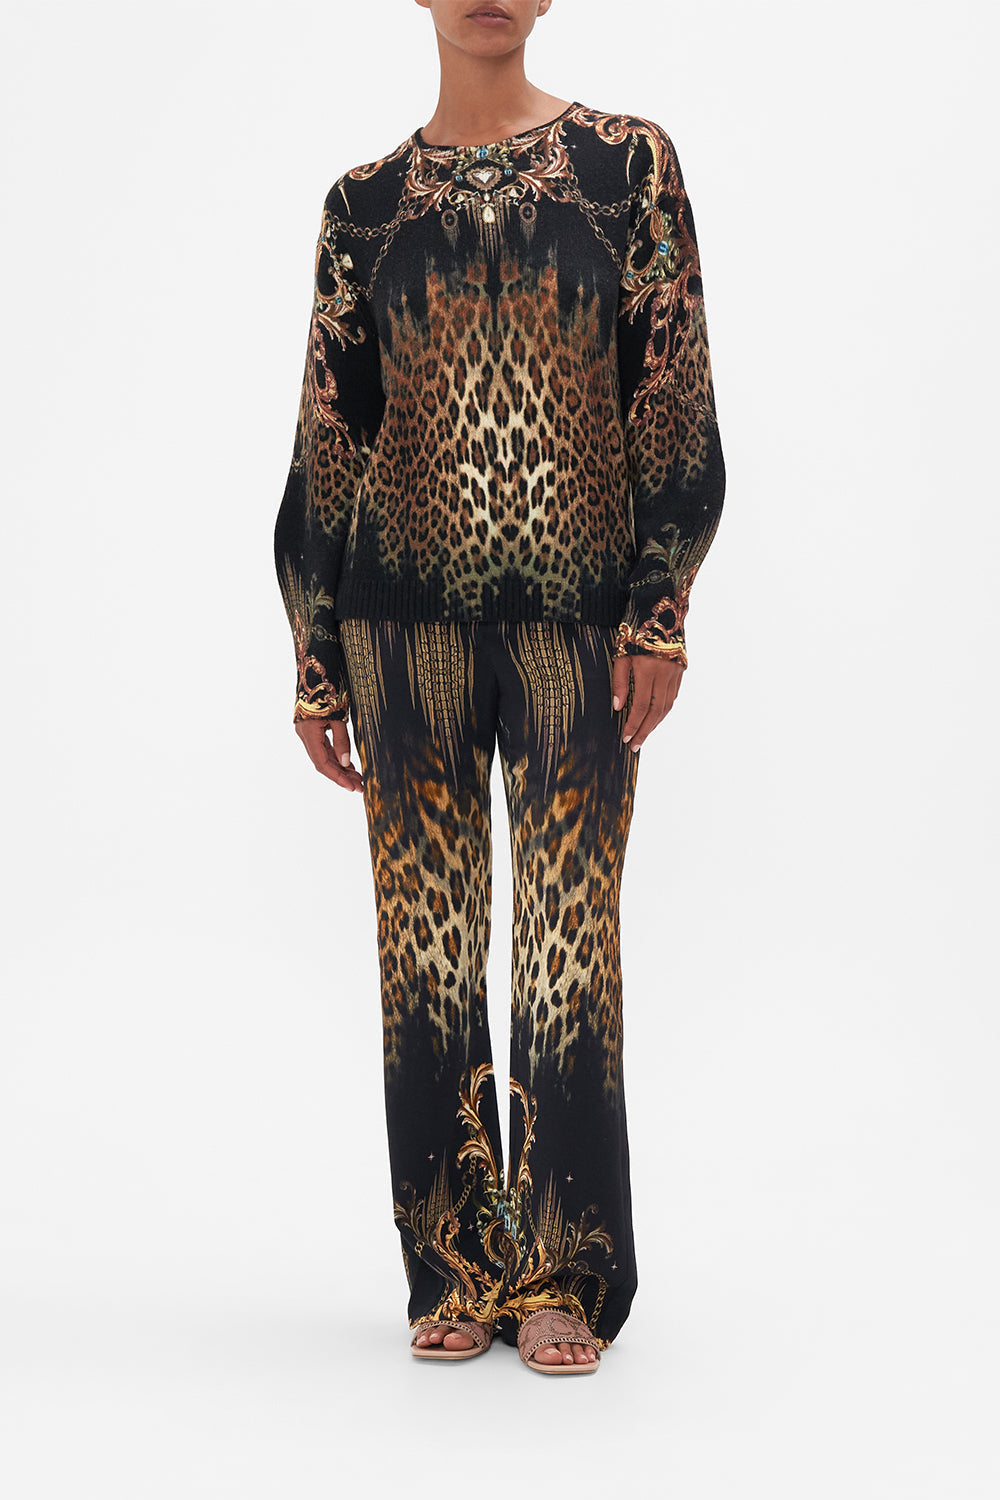 Front view of model wearing CAMILLA leopard print wool jumper in Jungle Dreaming print